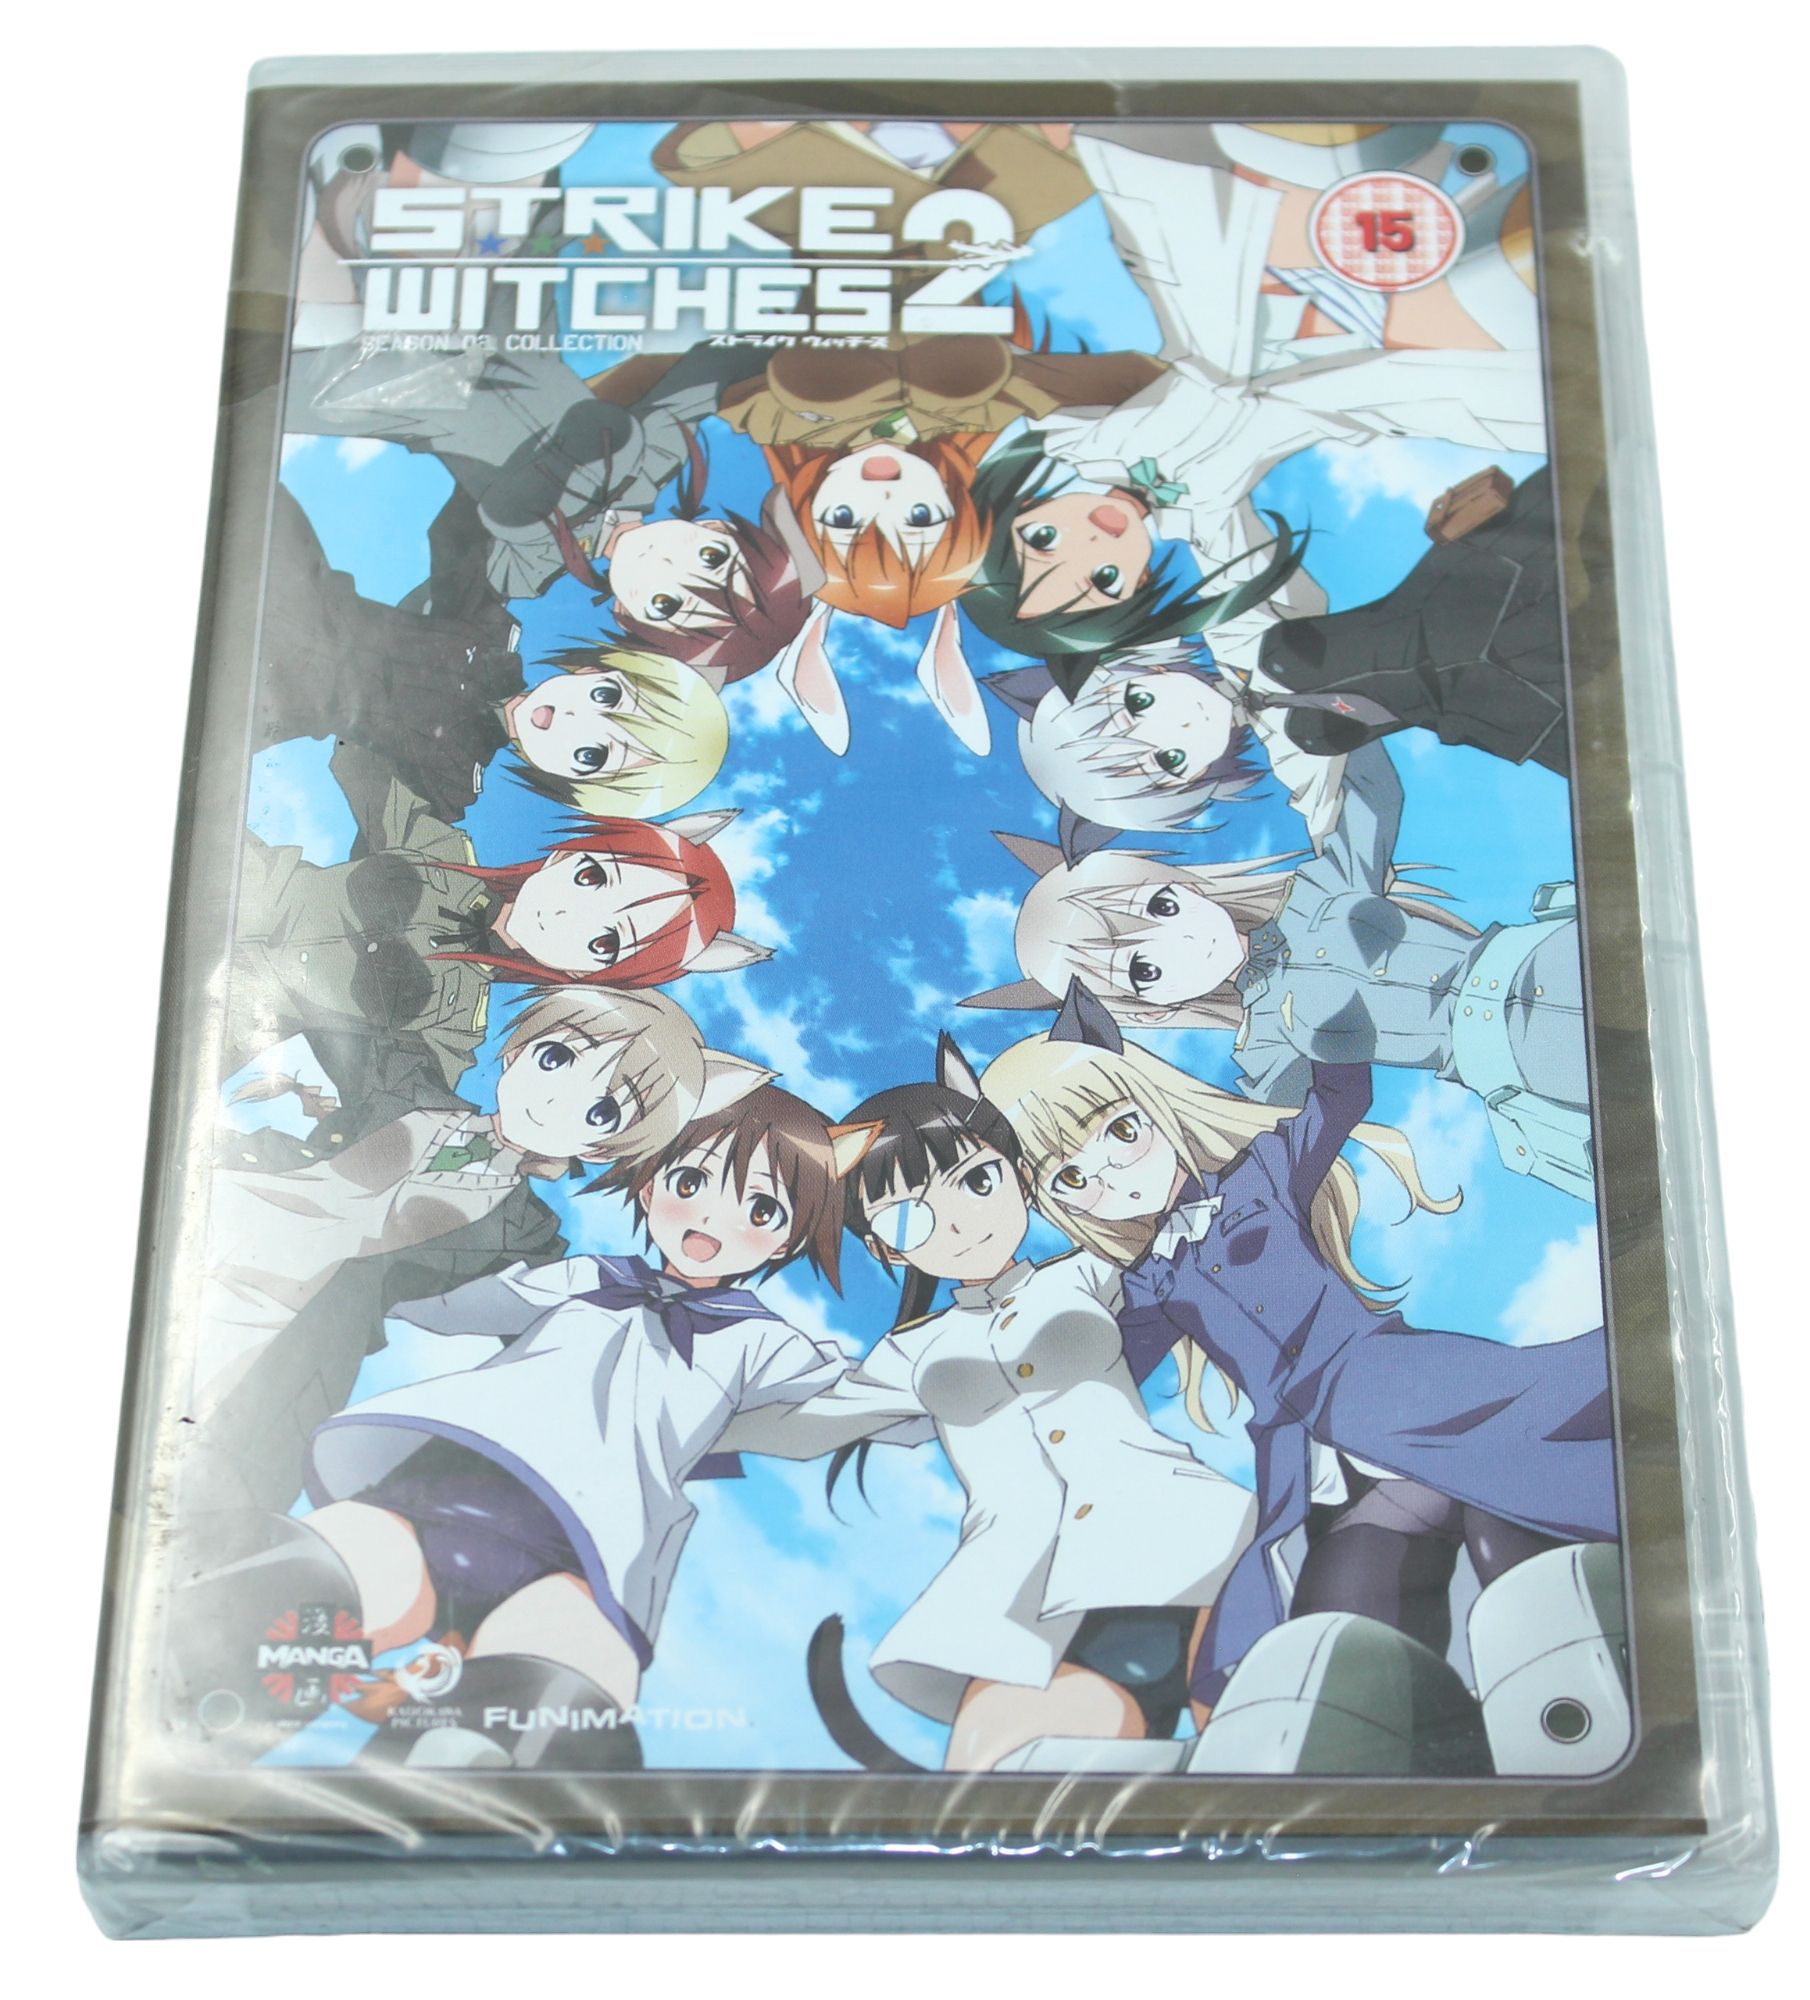 Strike Witches 2 Season 02 Collection Angielskie Napisy DVD Video